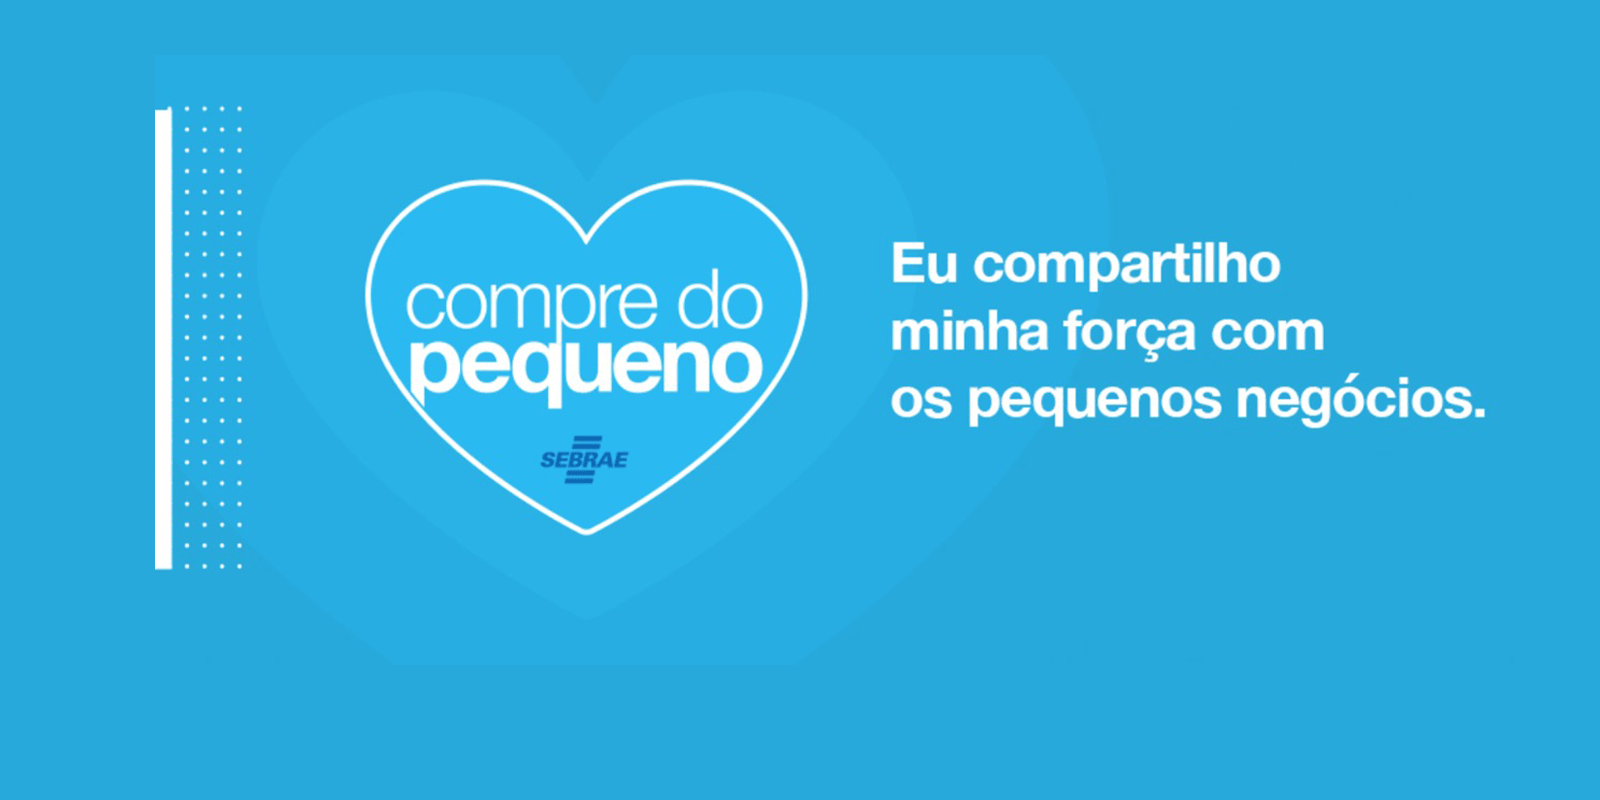 Featured image for “Compre do pequeno”